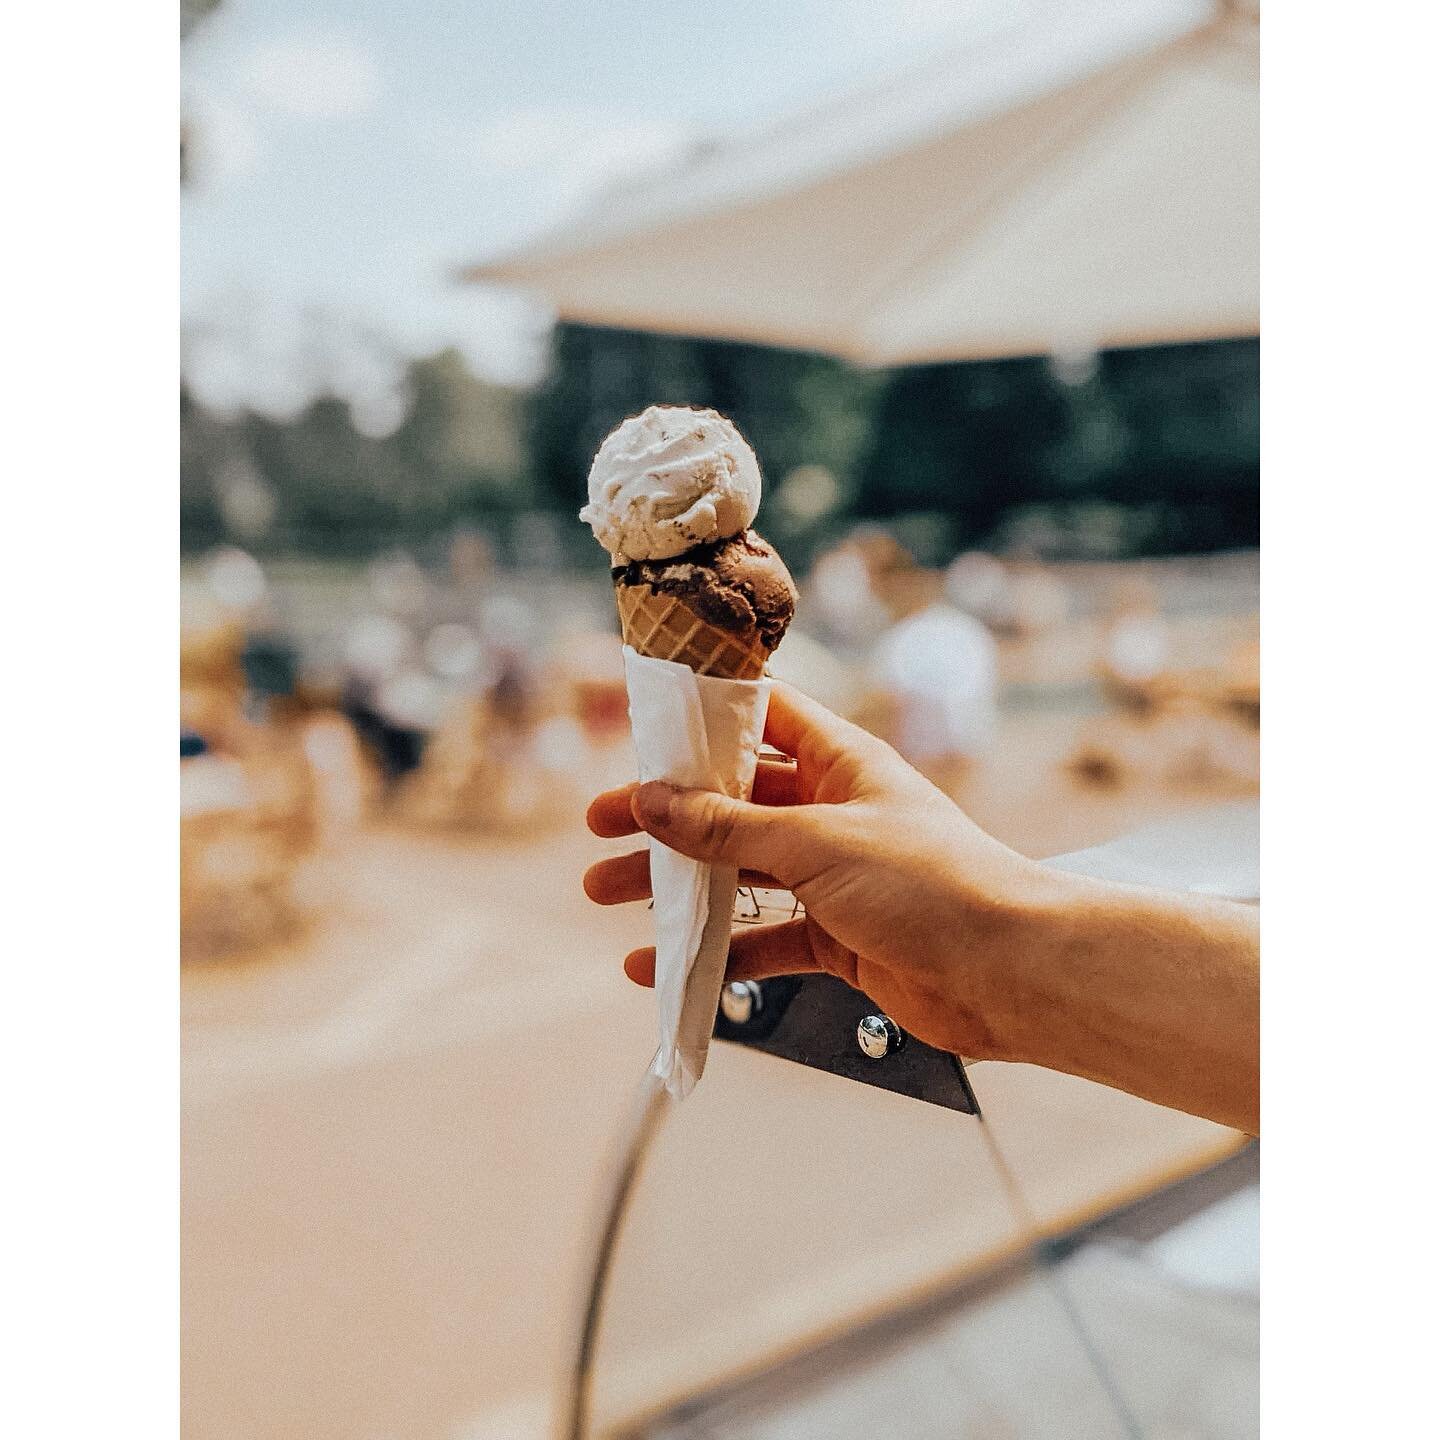 Did you know scoops are back at the park? Choose from soft serve or classic gelato to cool down today 🥵